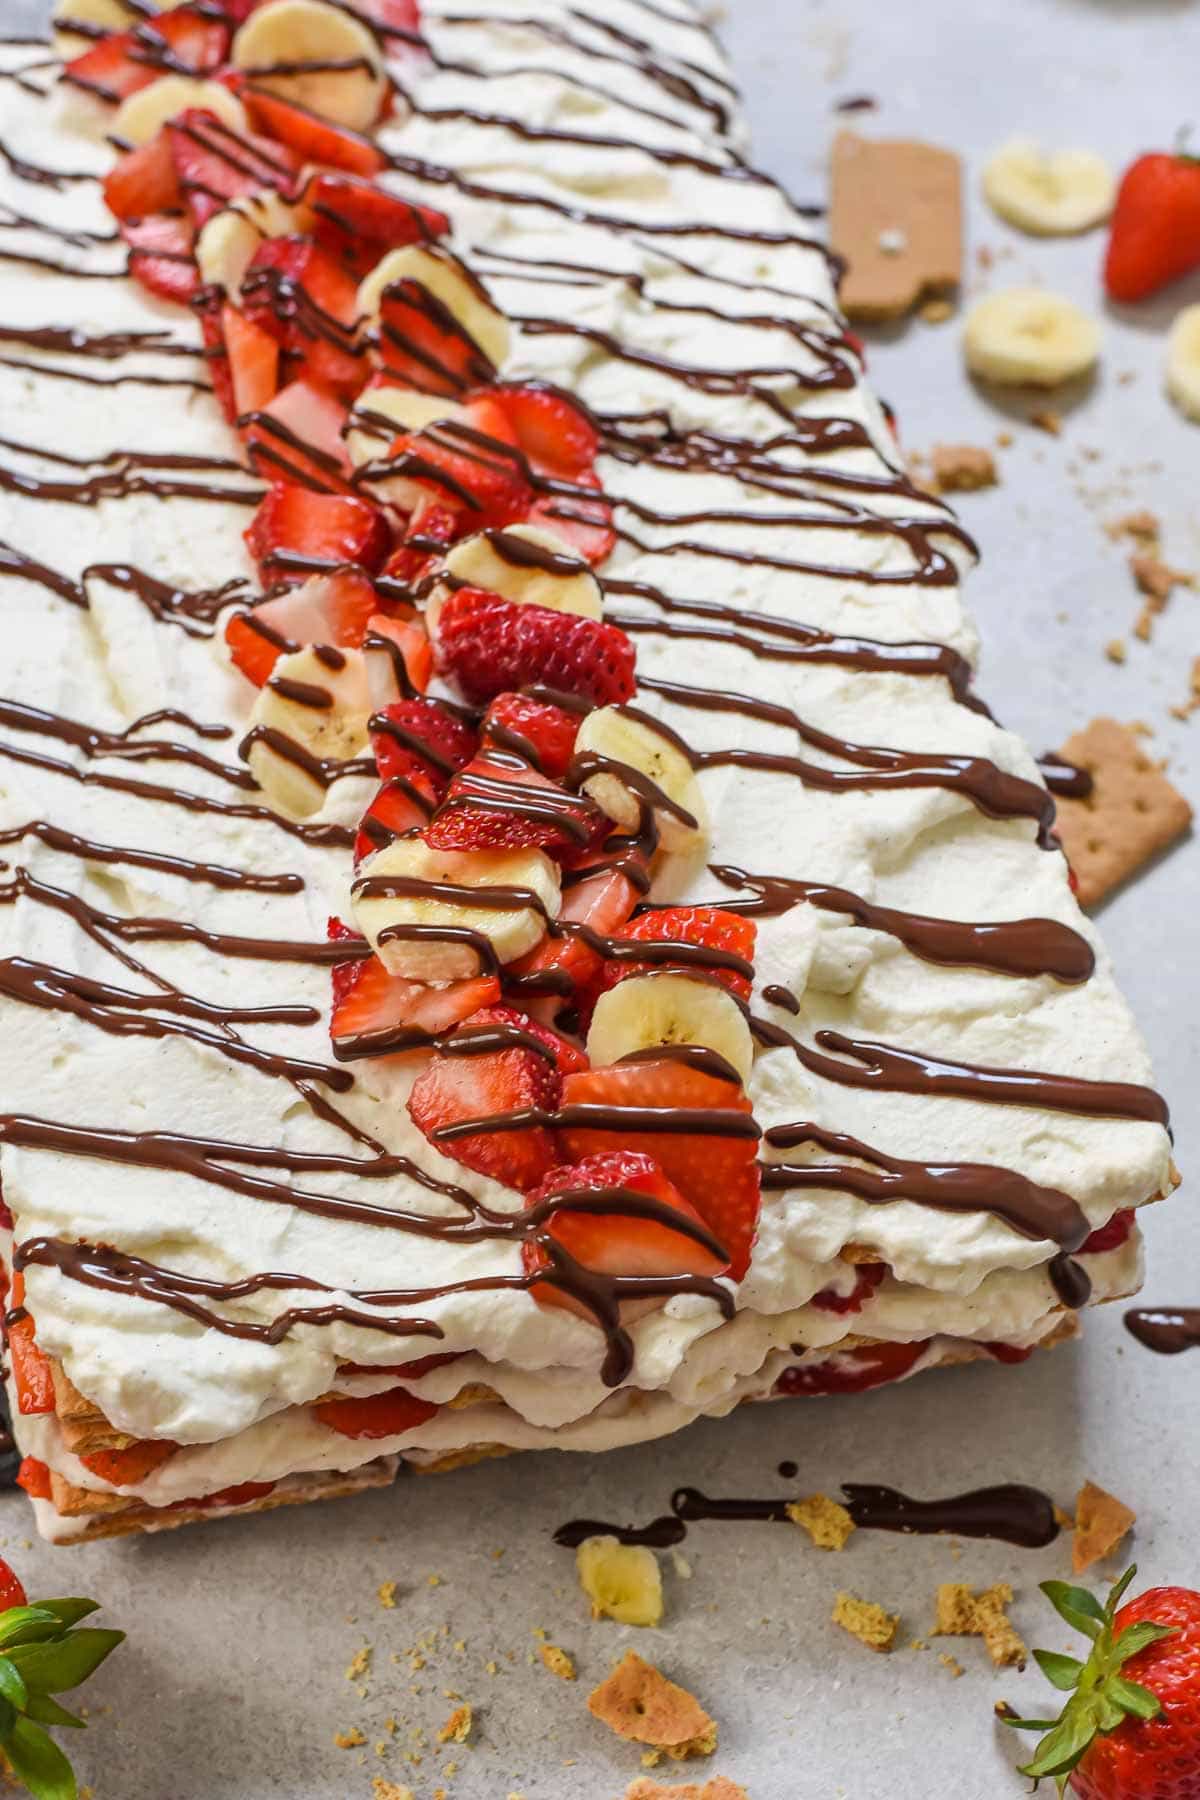 This Strawberry Icebox Cake recipe is so easy to make! It's the perfect cool, creamy, no bake dessert for summer!